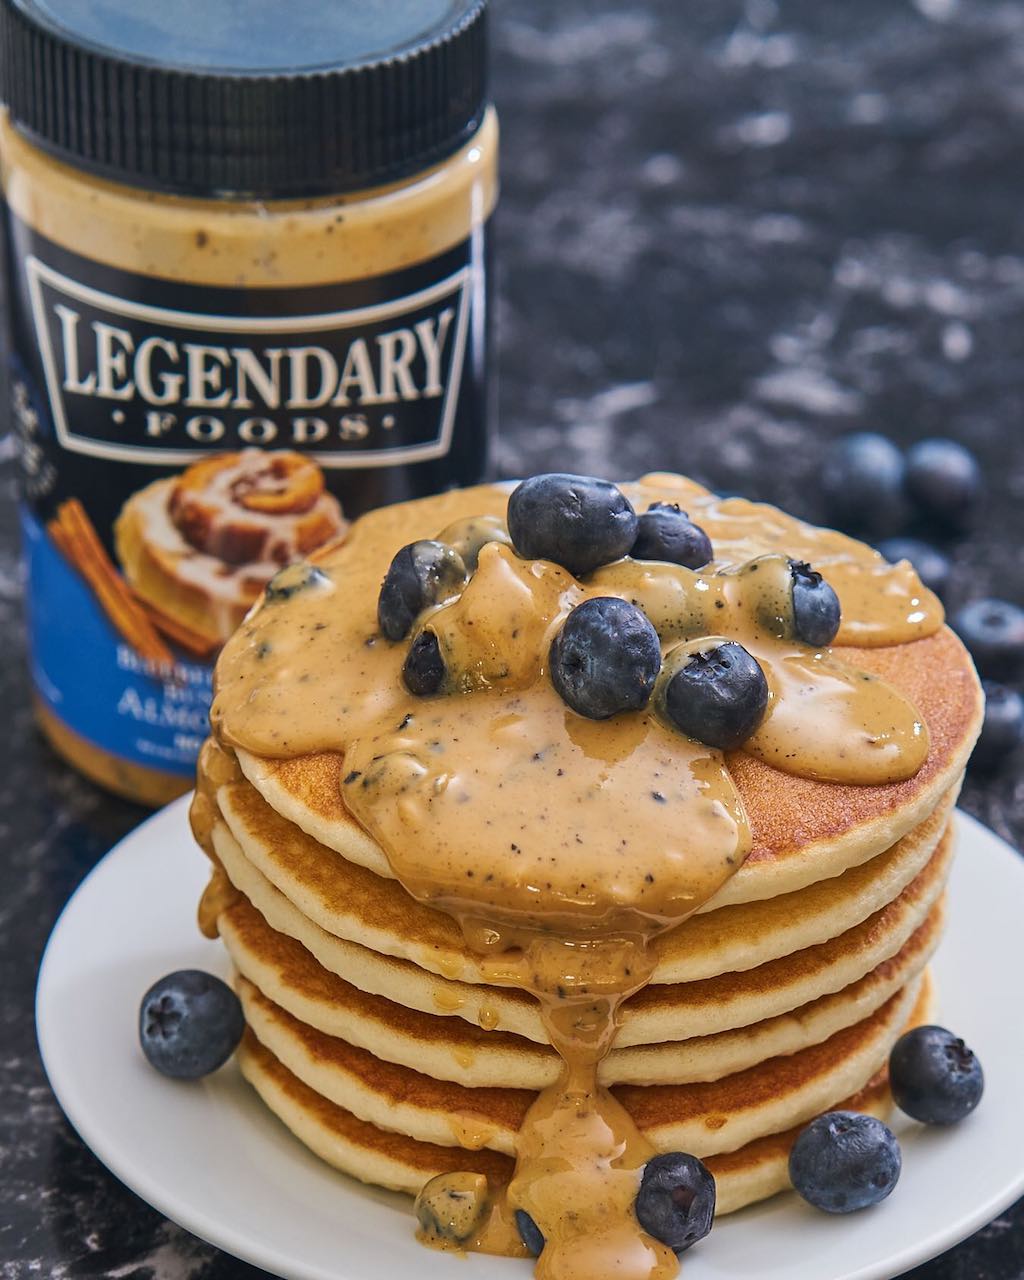 Legendary foods almond butter on pancakes with blueberries 